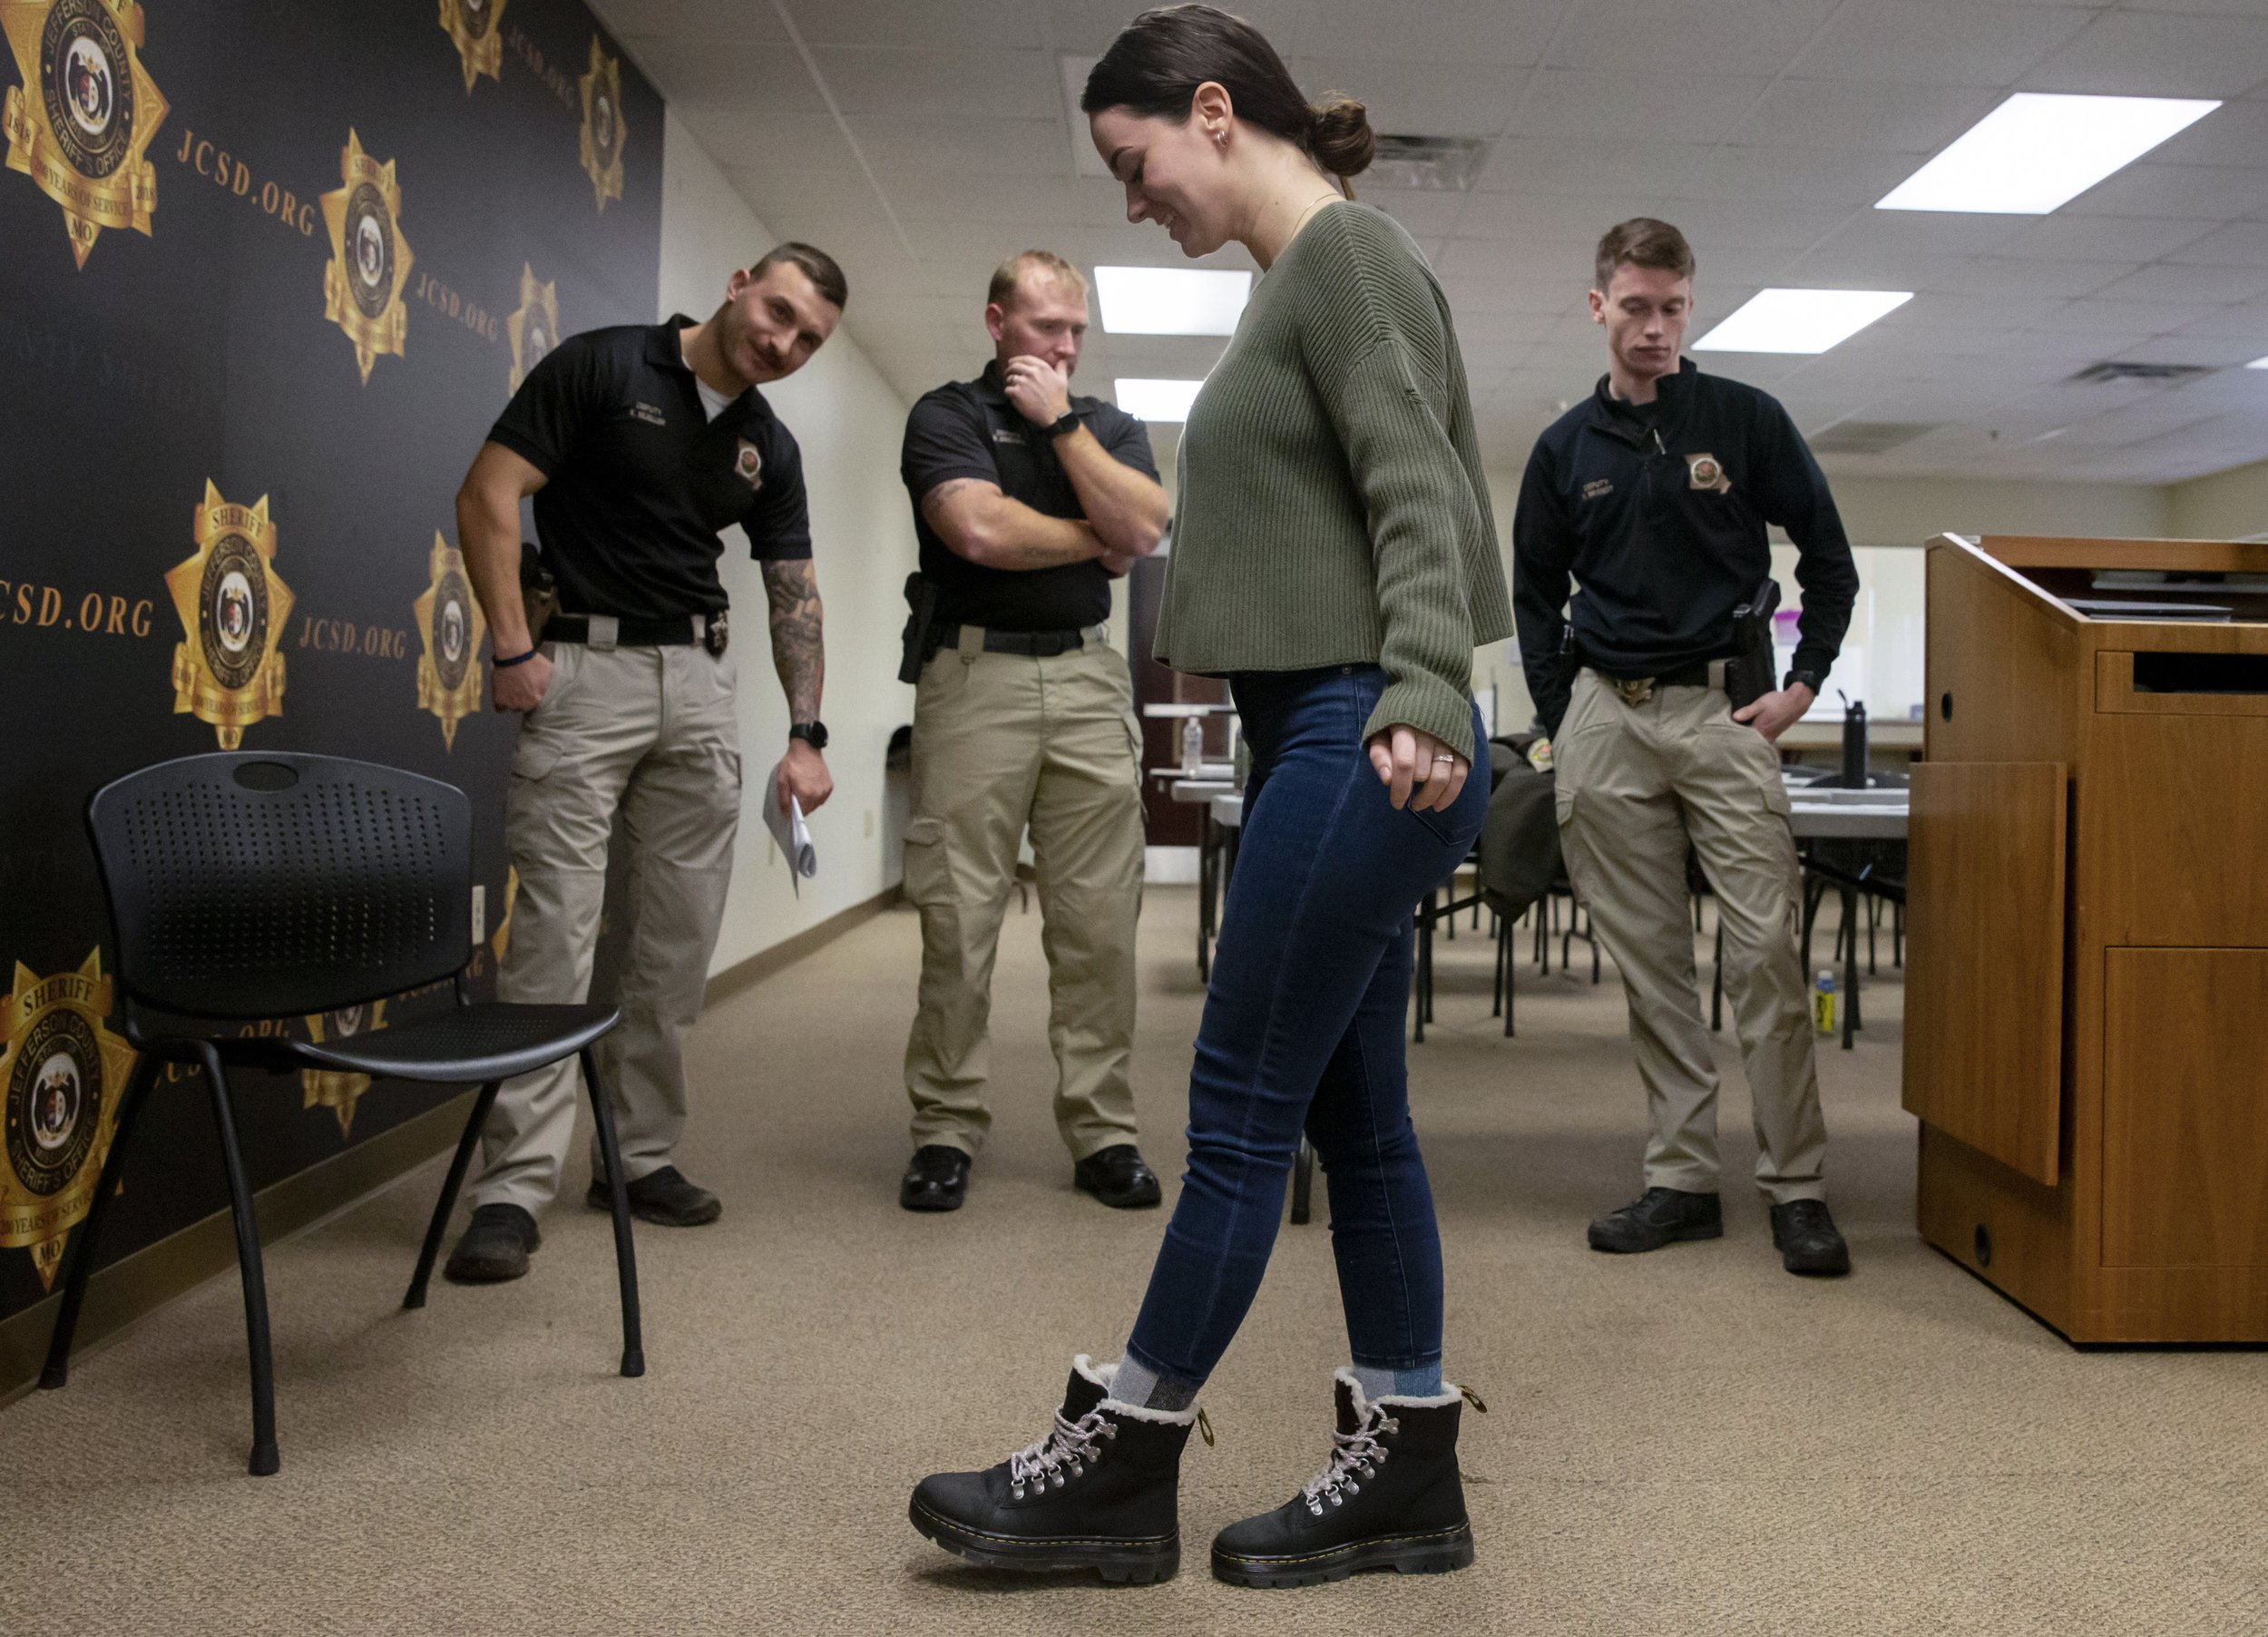  Sheriff's Deputies Kyle Mueller, left, Brock Bridges, center, and Nathaniel Brandt, right, watch as volunteer Alex Newton, front, takes a sobriety test Tuesday, Jan. 10, 2023, at the Jefferson County Sheriff's Office in Hillsboro. Instructors traine